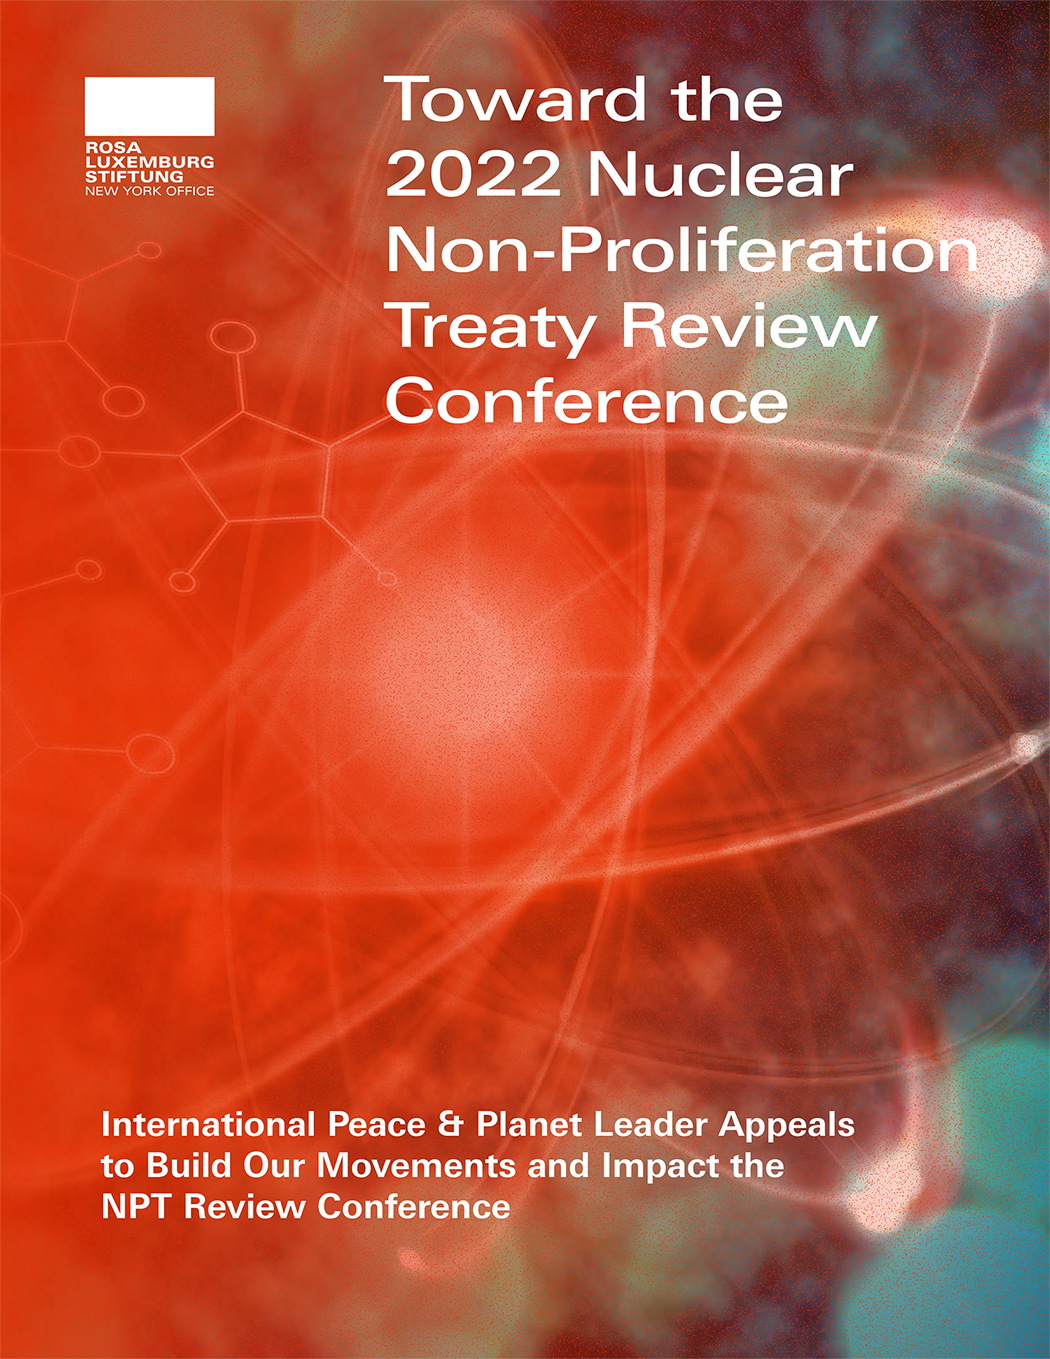 Toward the 2022 Nuclear Non-Proliferation Treaty Review Conference